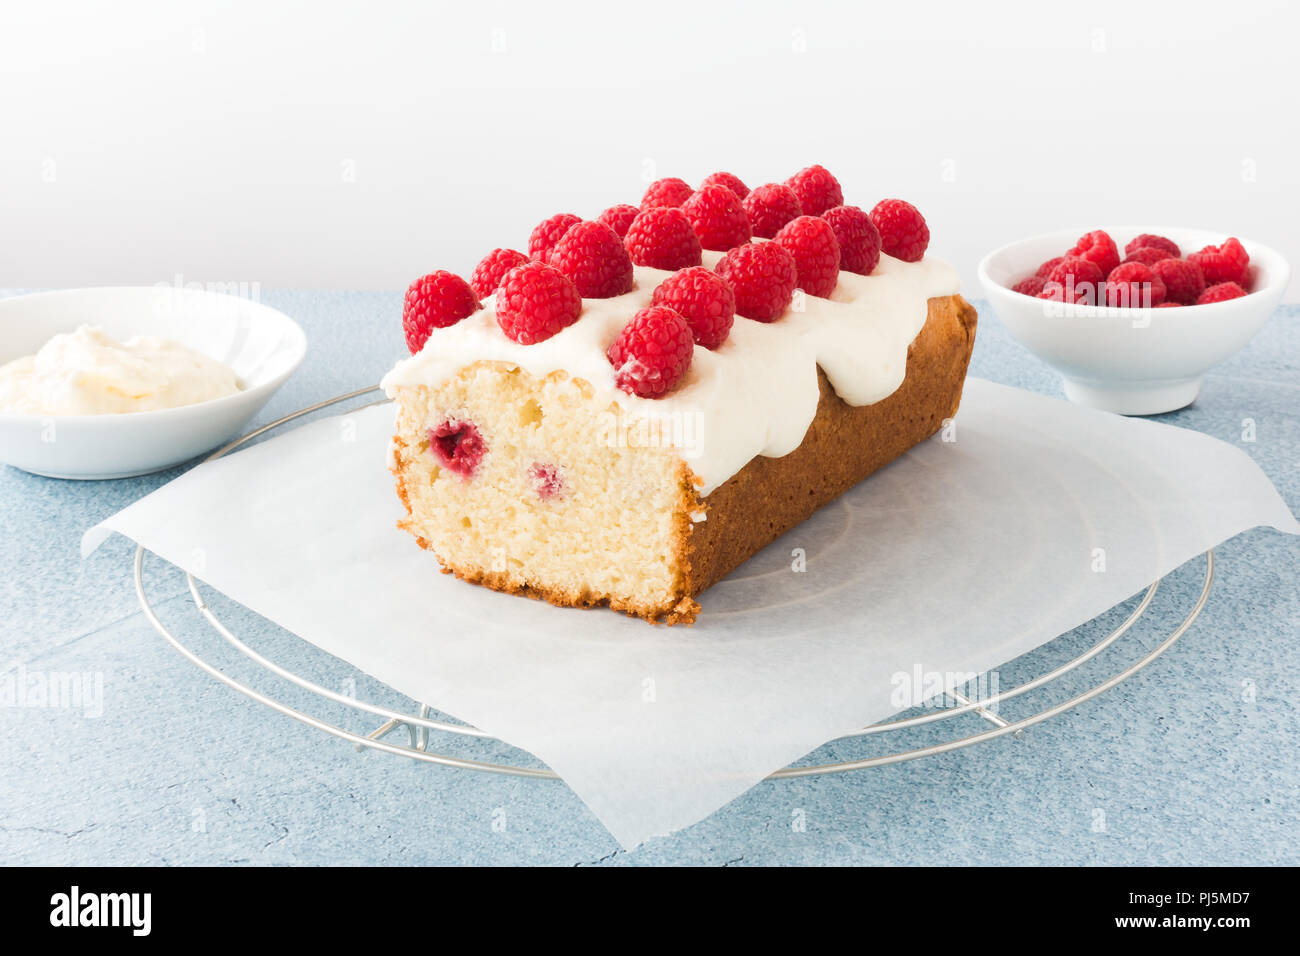 Closeup of a homemade raspberry loaf cake on parchment paper and cooling rack. Bowls filled with fresh raspberries and frosting in the background. Stock Photo